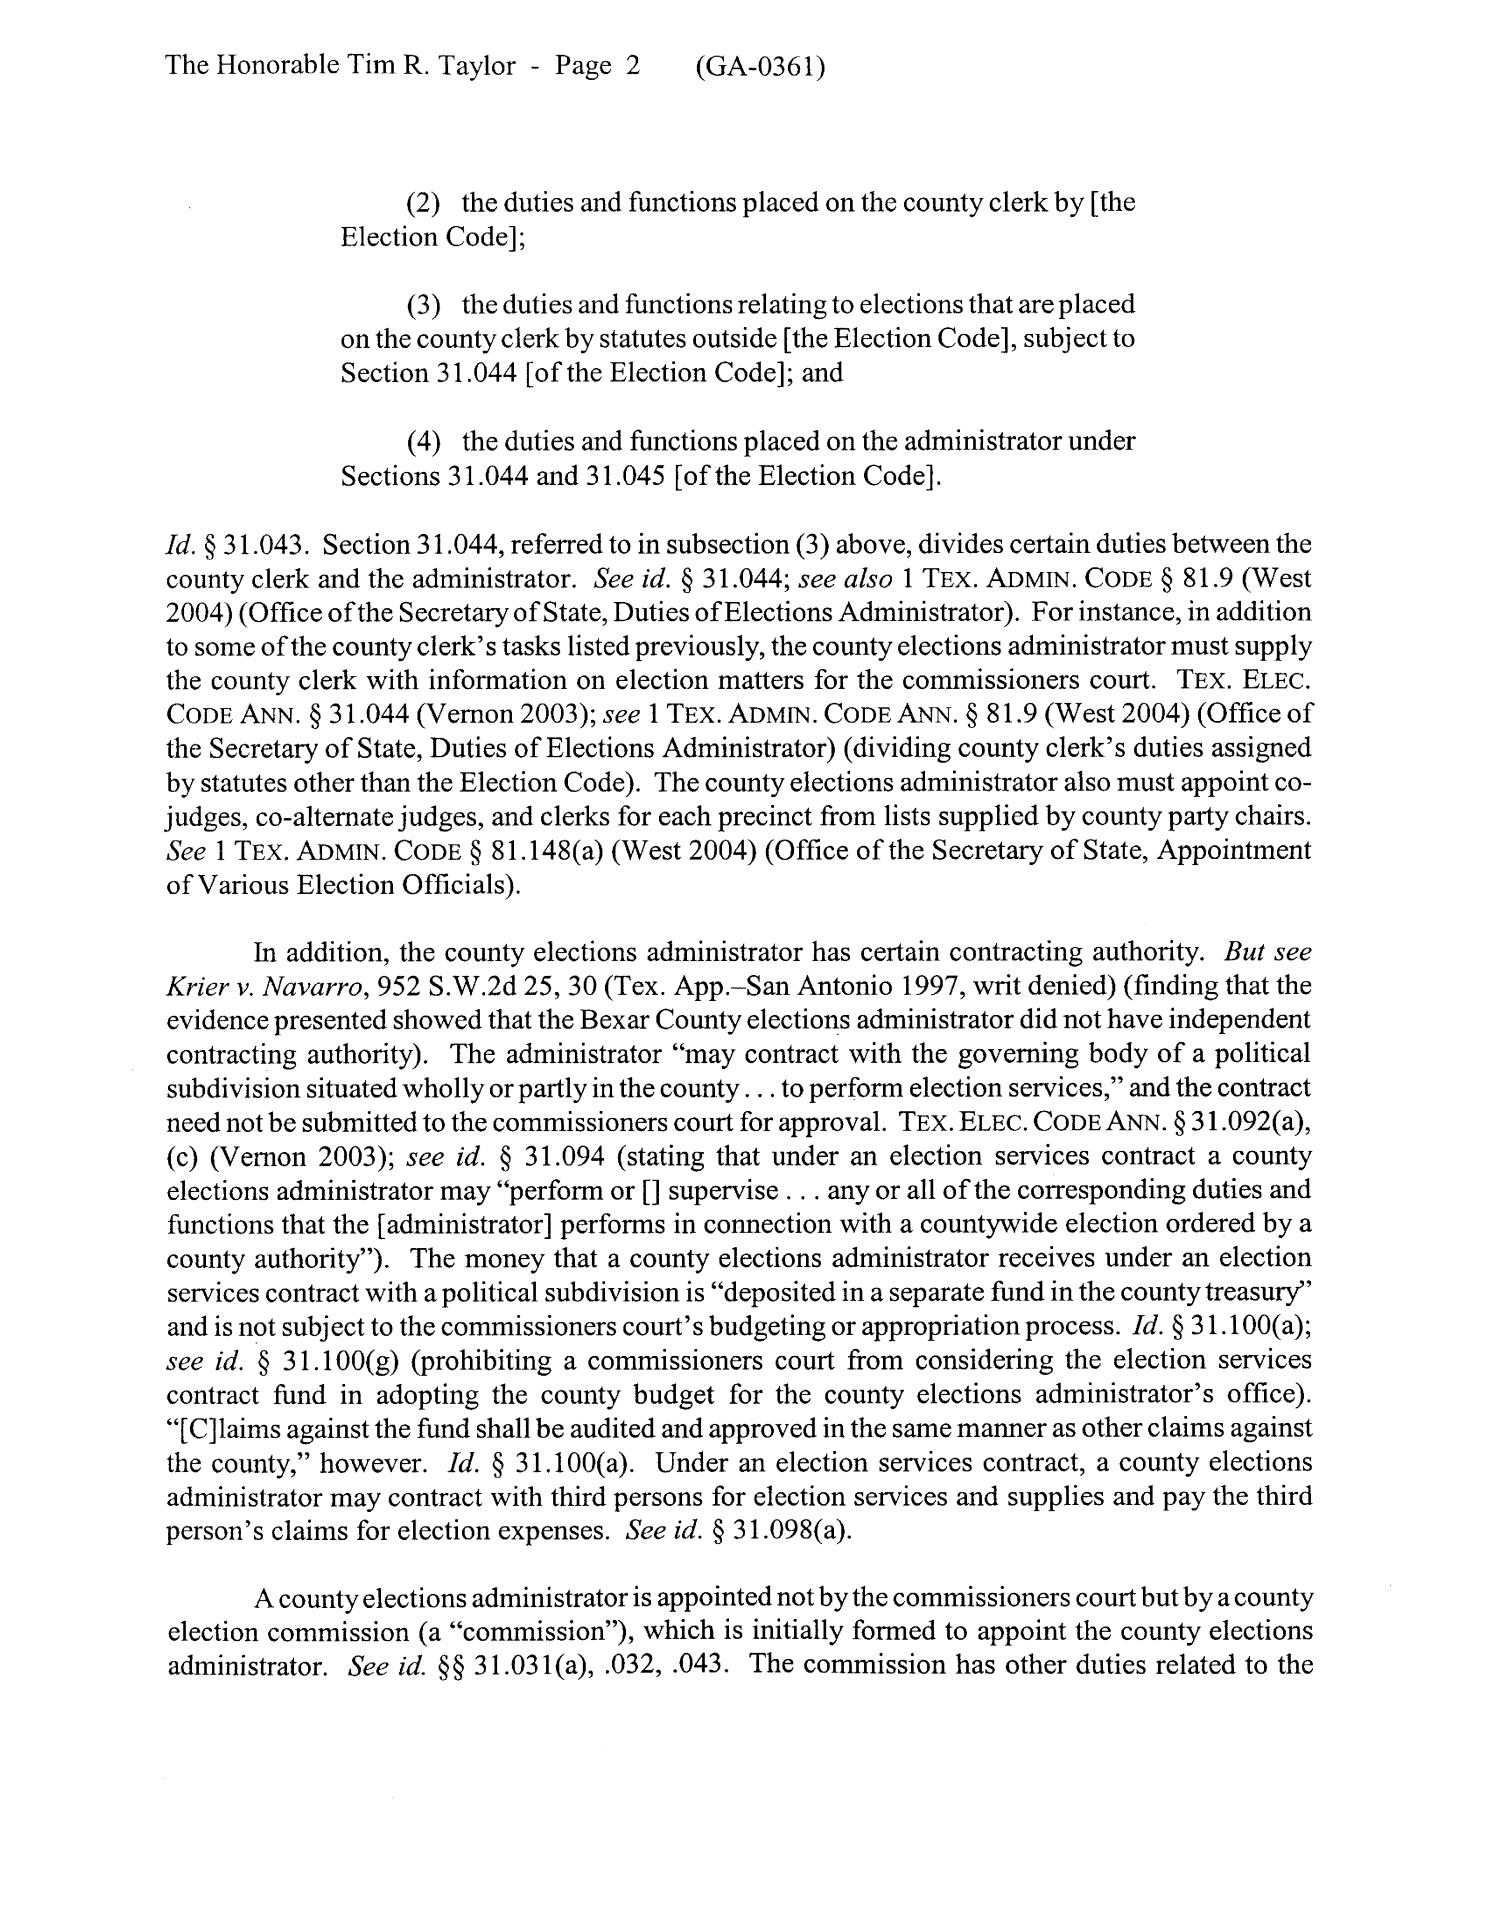 Texas Attorney General Opinion: GA-0361
                                                
                                                    [Sequence #]: 2 of 8
                                                